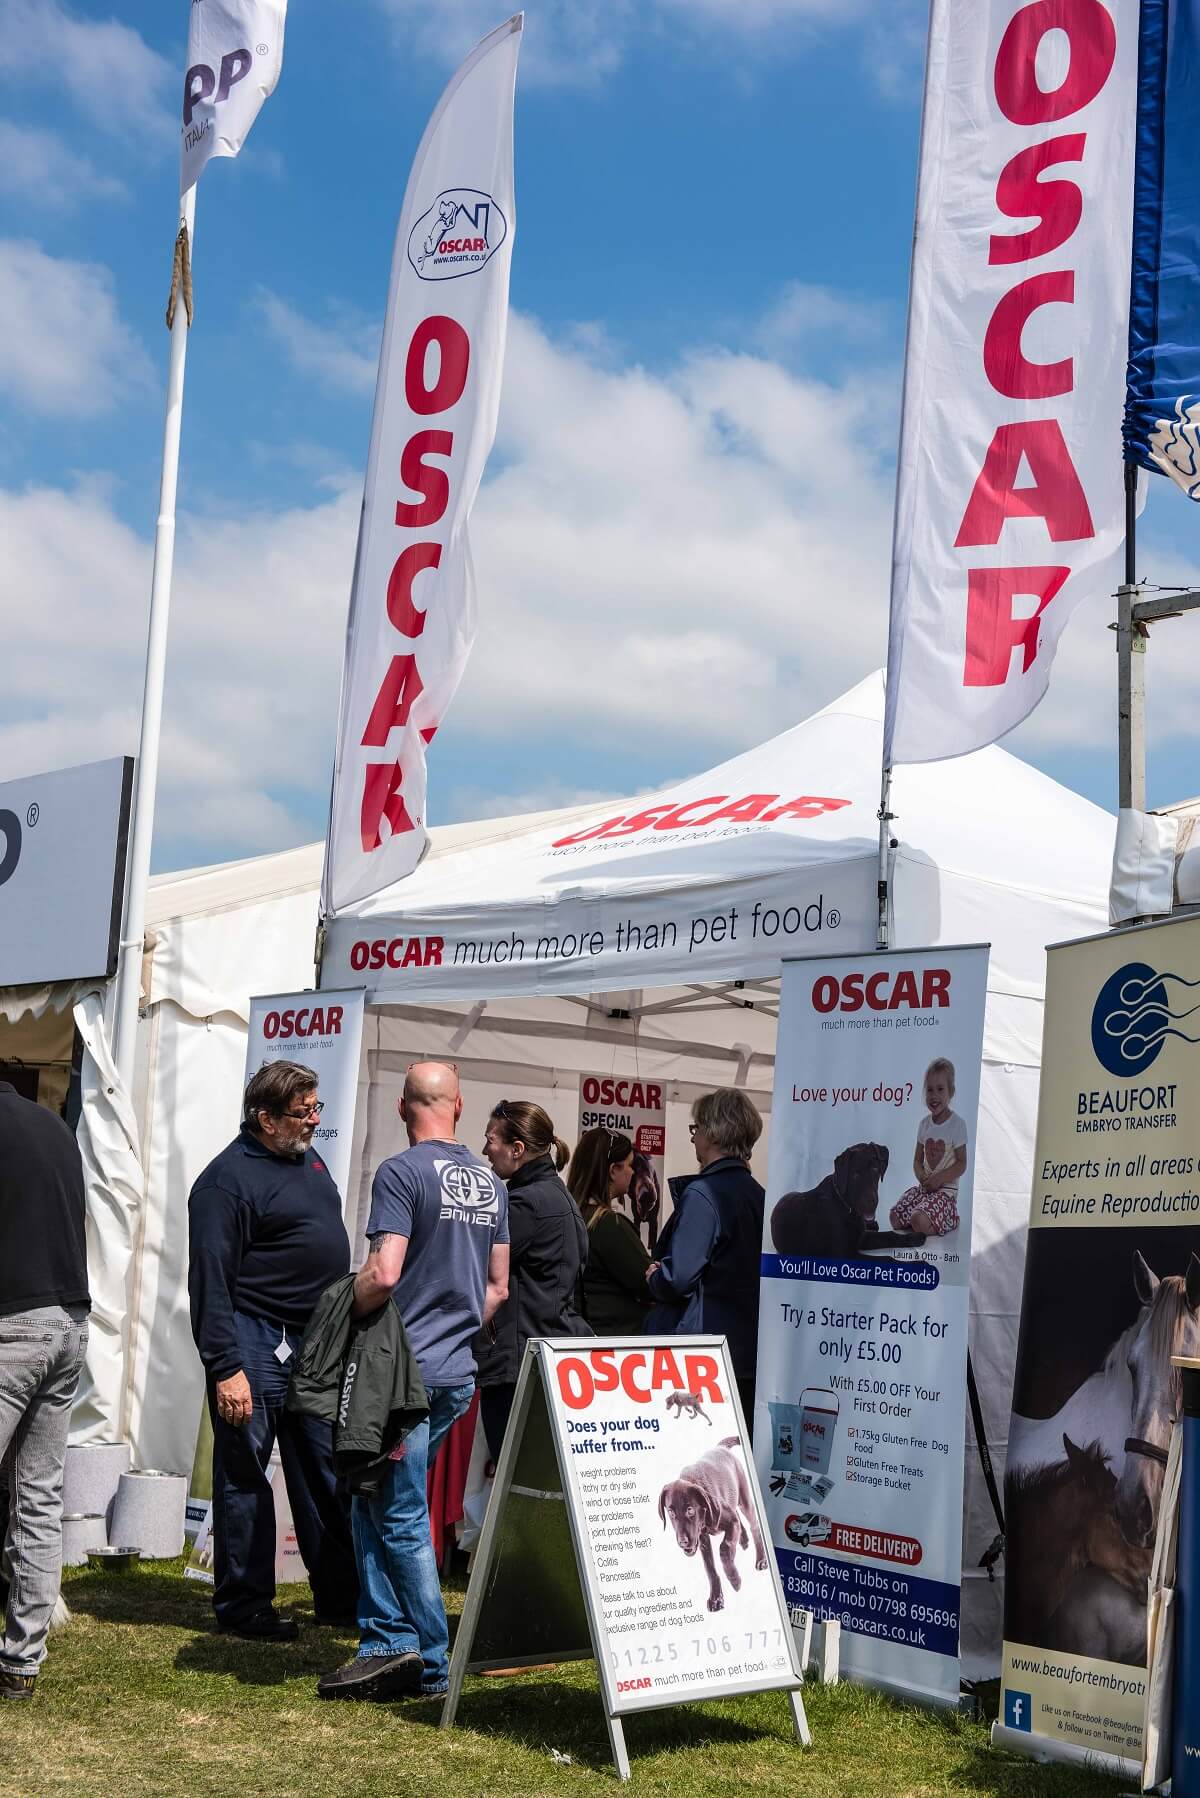 oscar pet foods stall at a country fayre